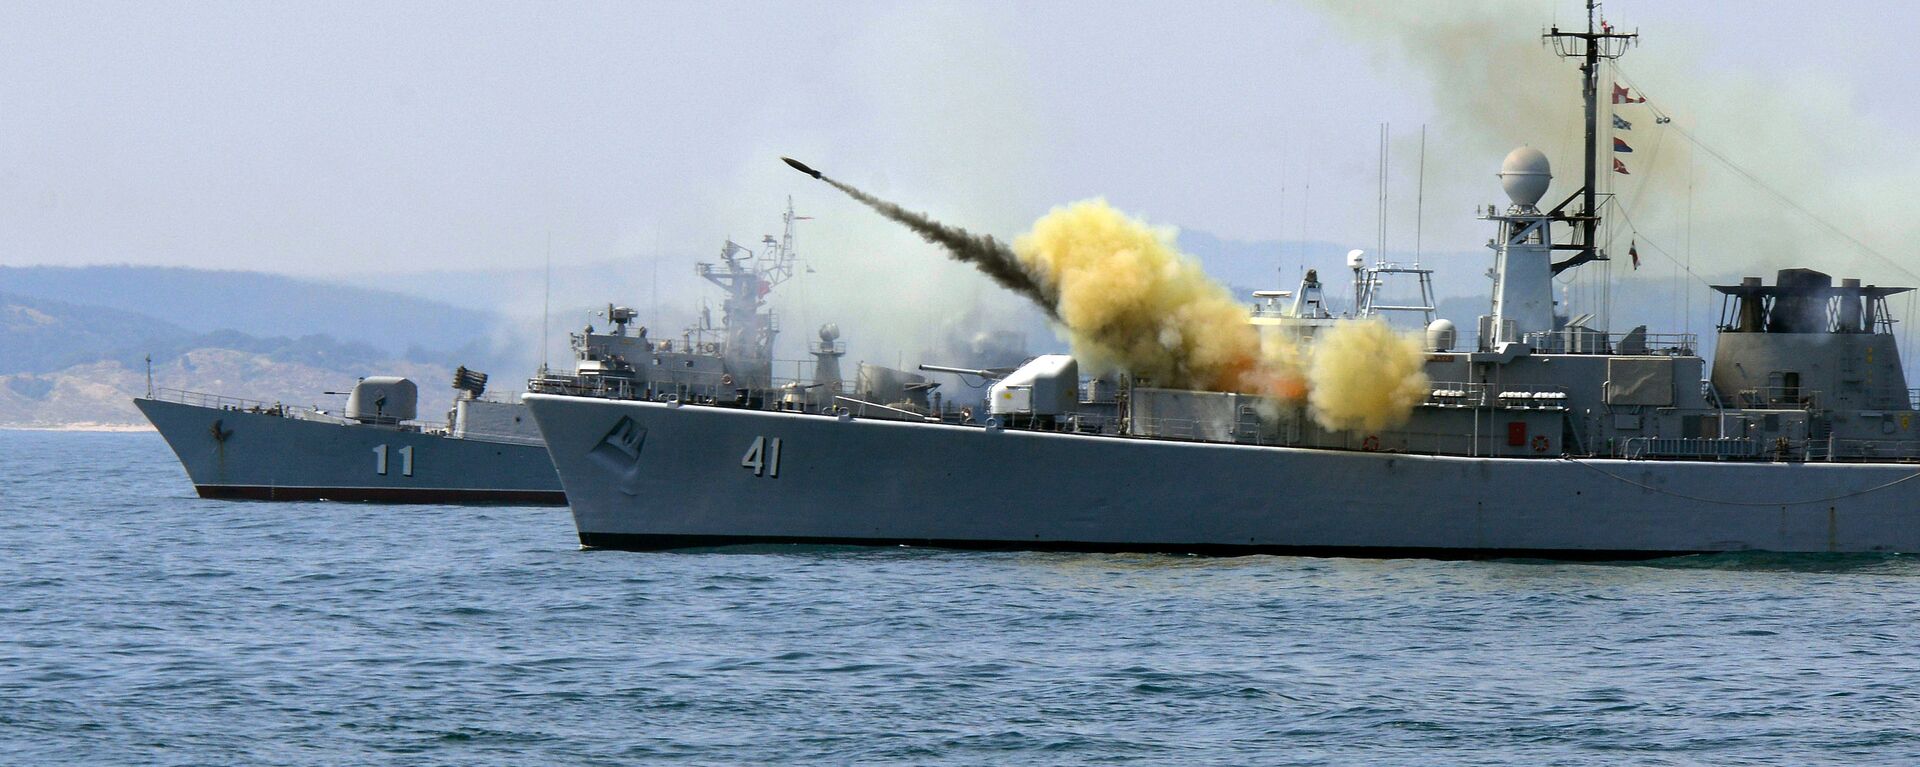 An anti-submarine rocket blasts off a rocket launcher from the Bulgarian navy frigate Drazki during the BREEZE 2014 military drill in the Black Sea - Sputnik International, 1920, 25.05.2024